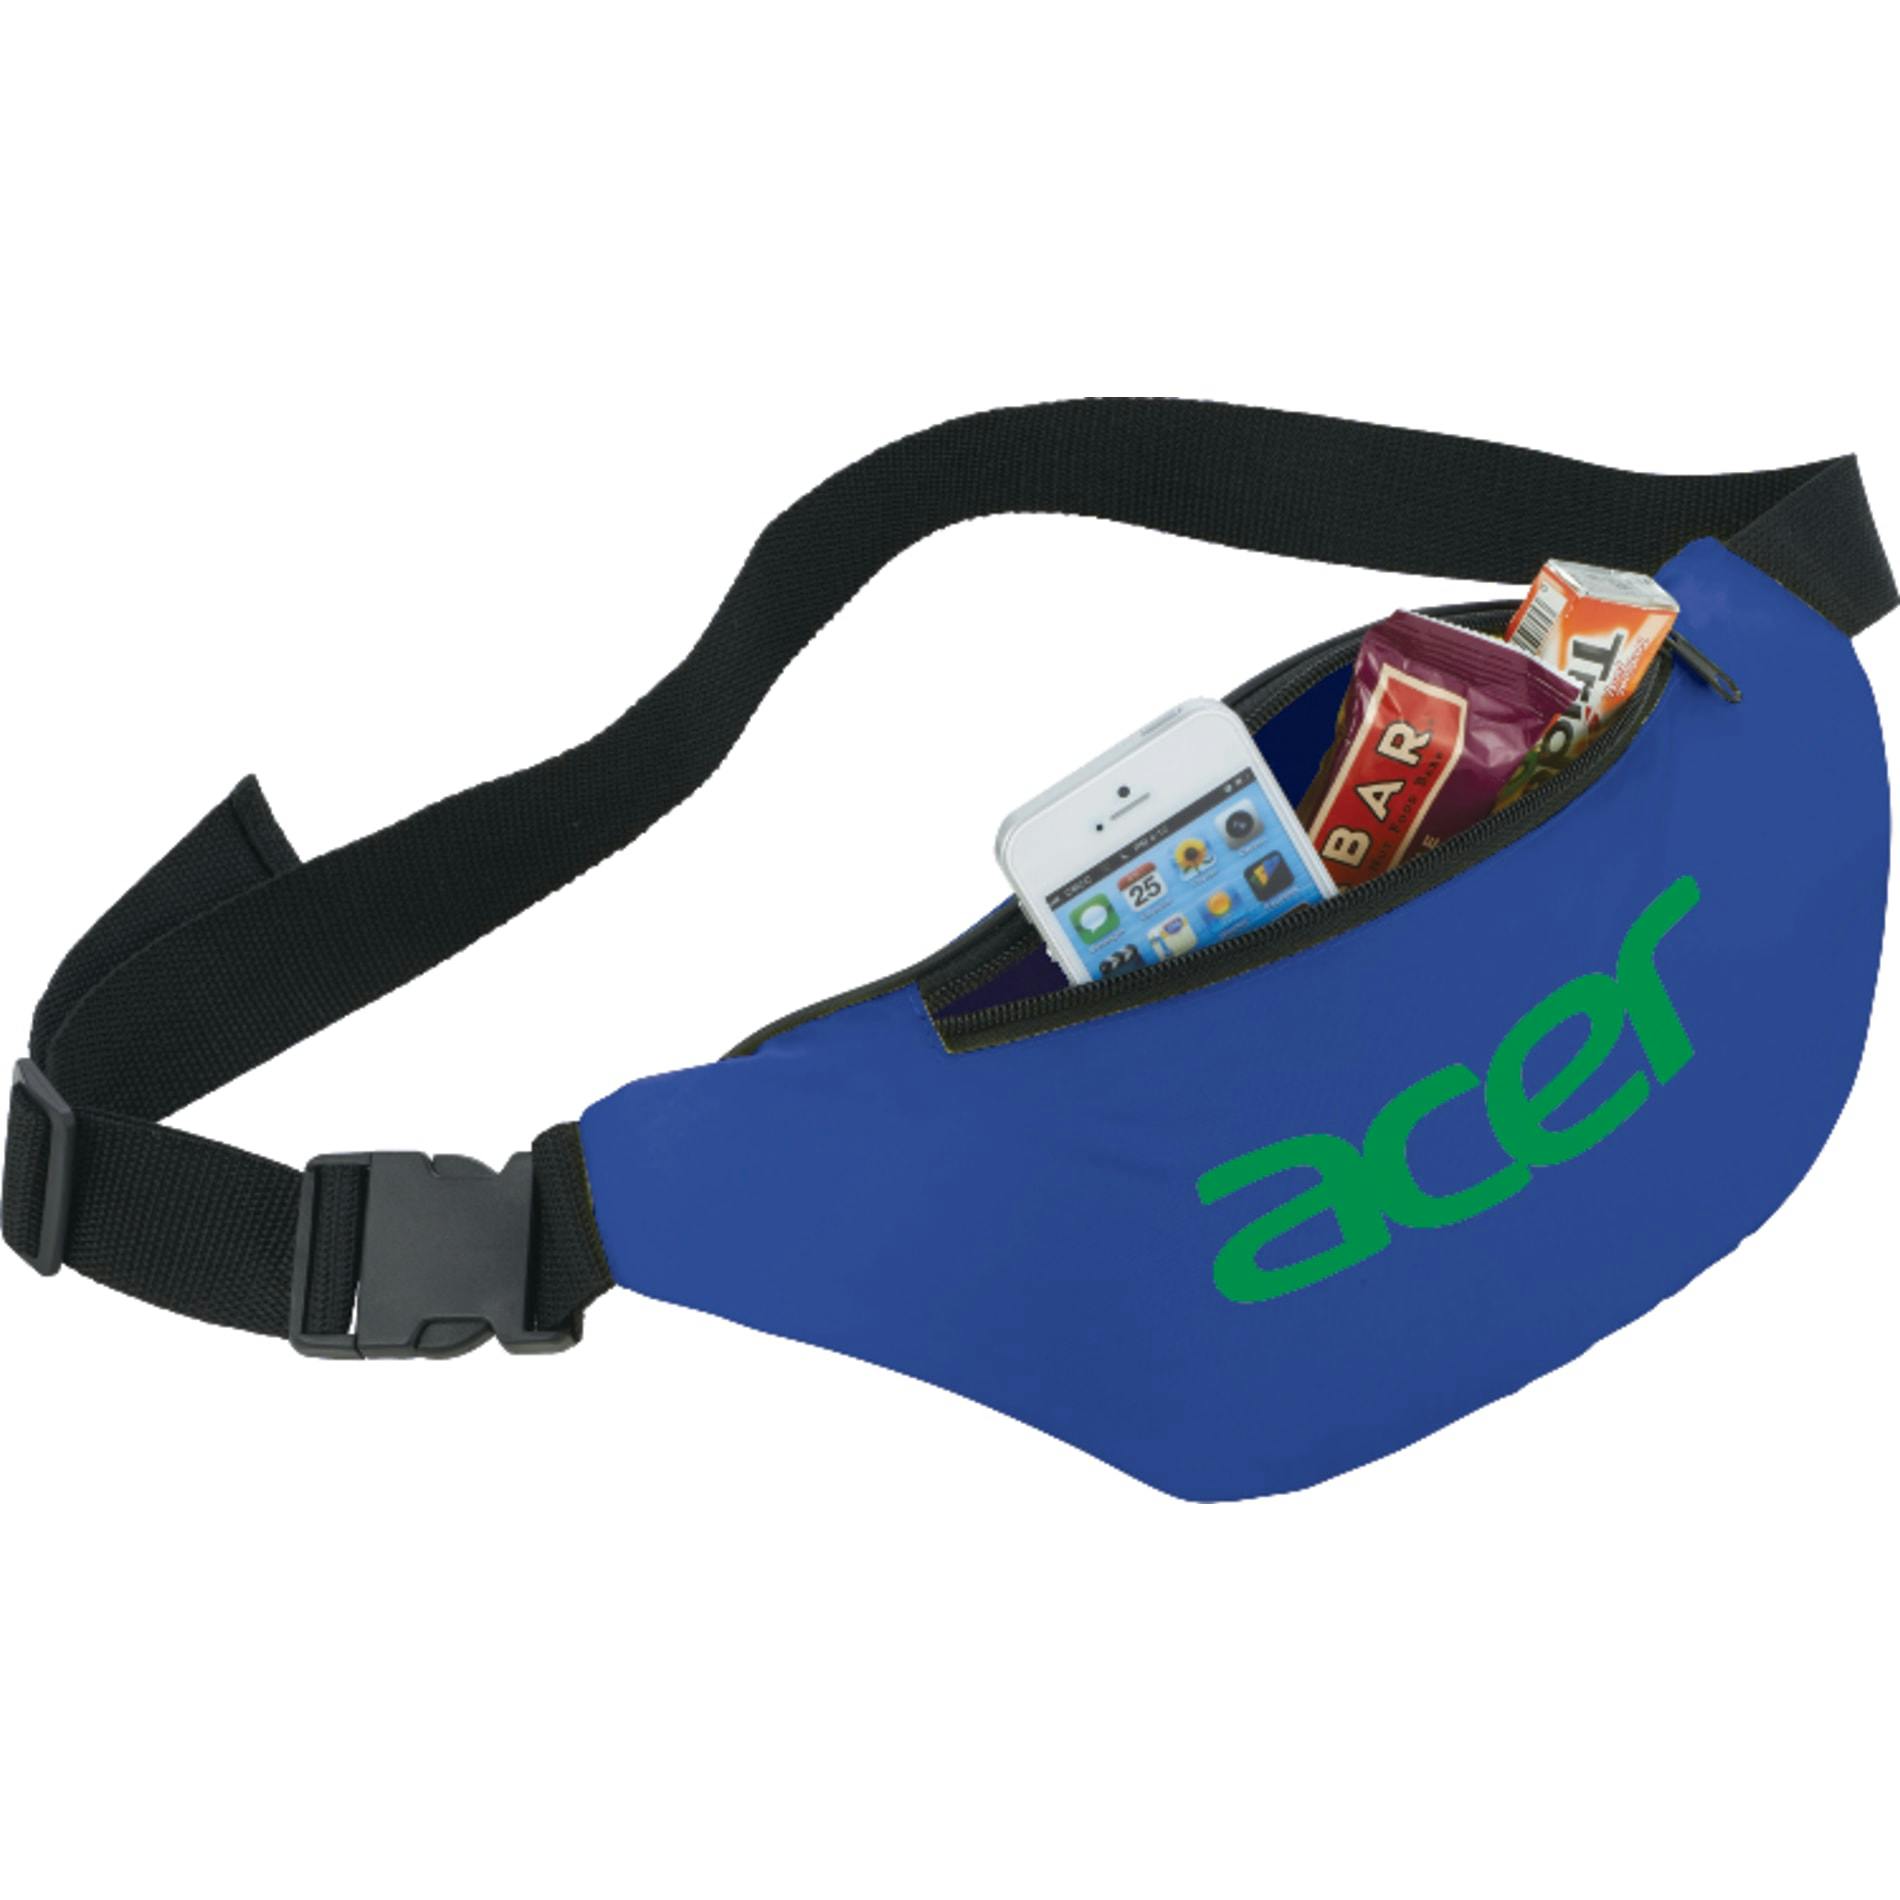 Hipster Budget Fanny Pack - additional Image 6